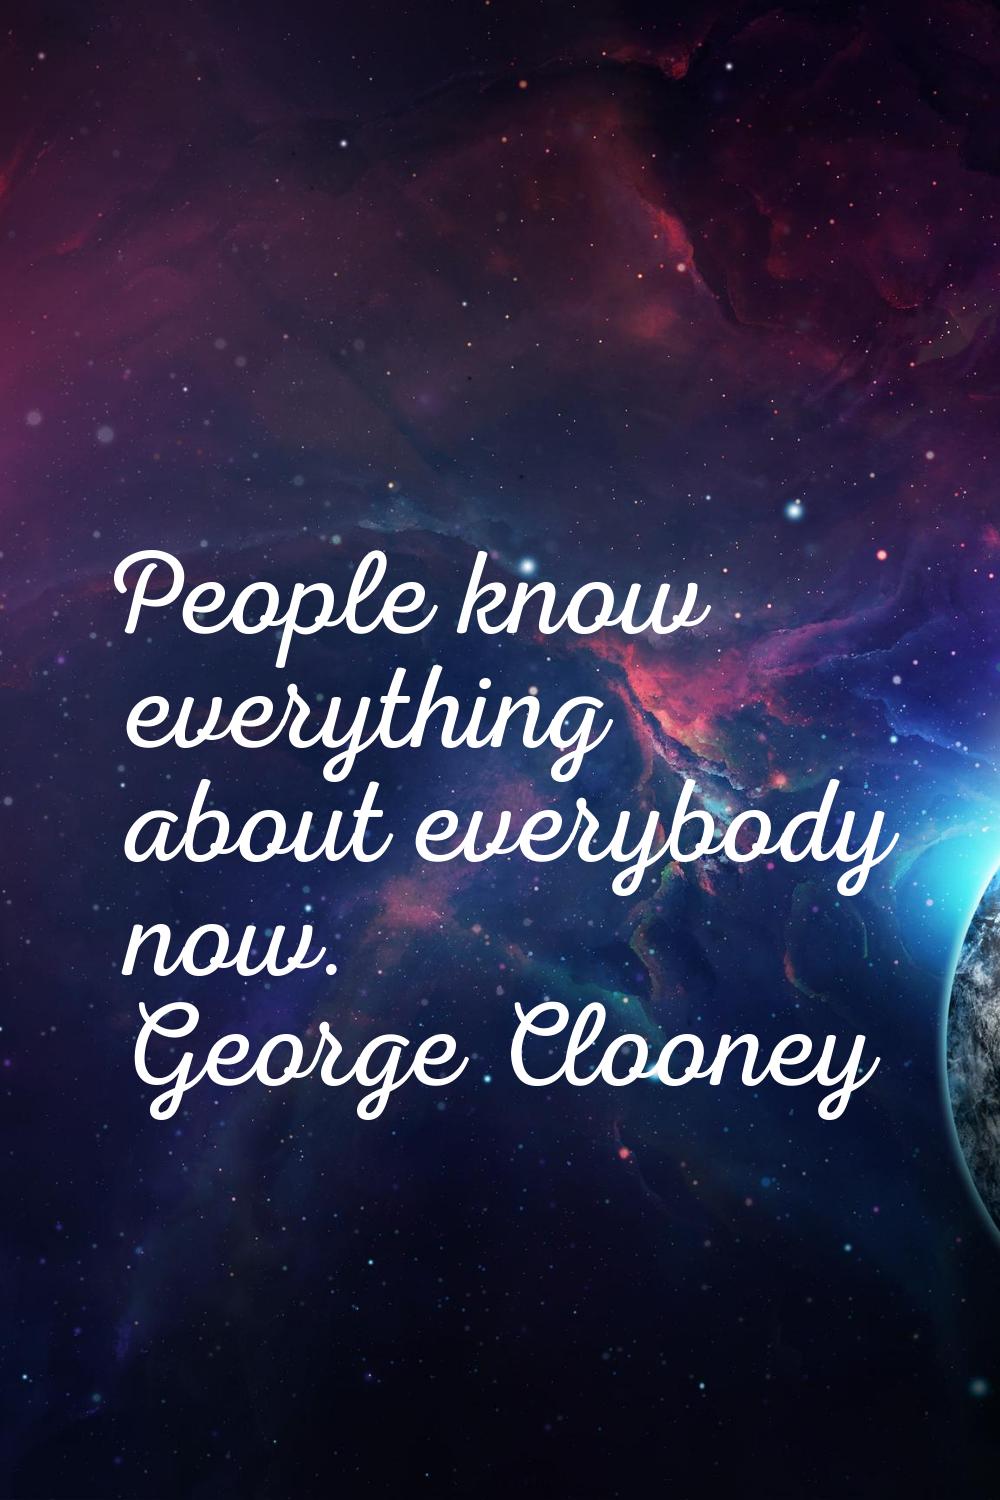 People know everything about everybody now.